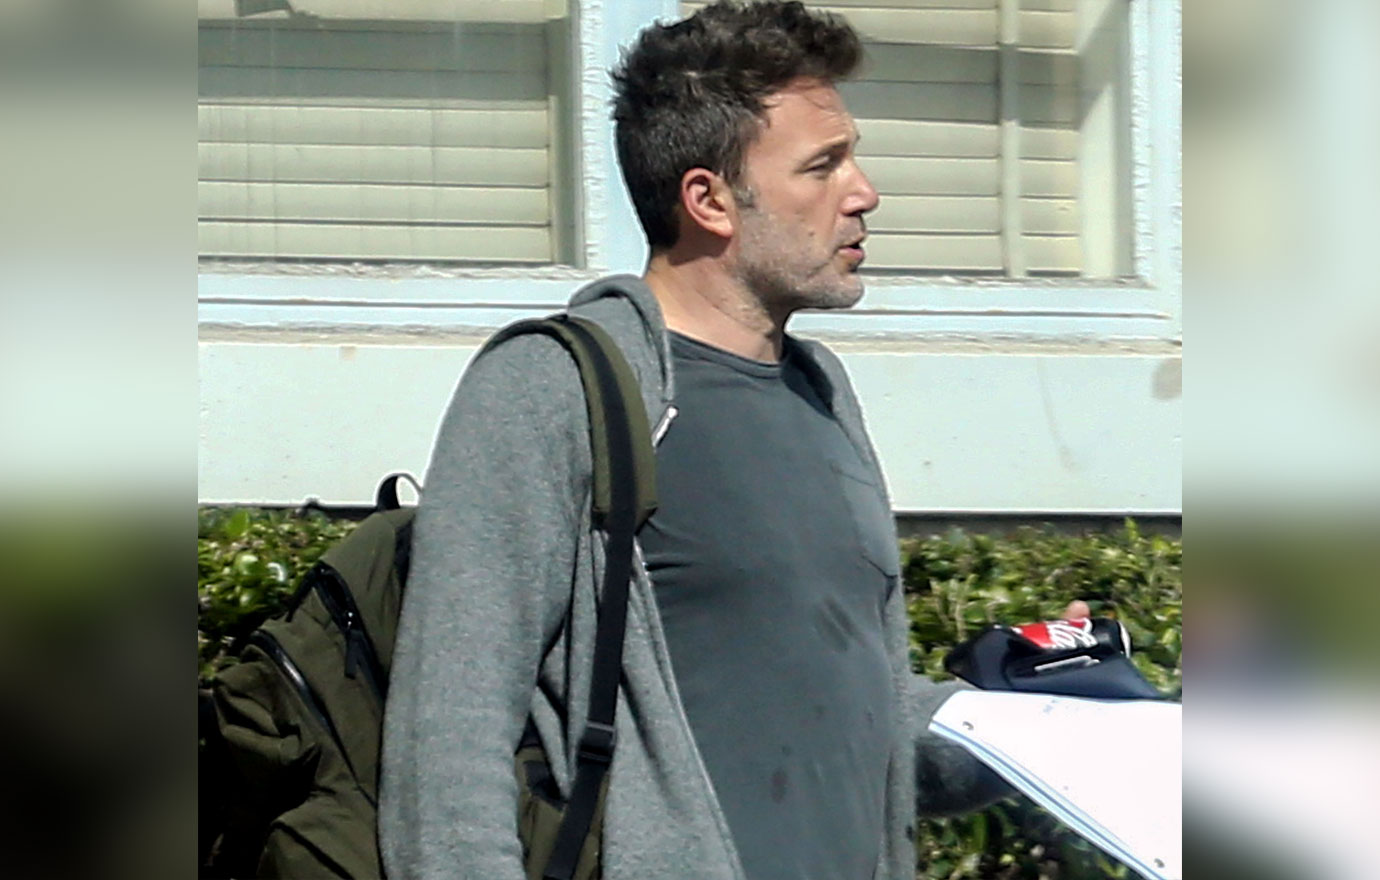 EXCLUSIVE: Ben Affleck looks scruffy and disheveled on his first day back at work after 'falling off the wagon' at a drunken Halloween party